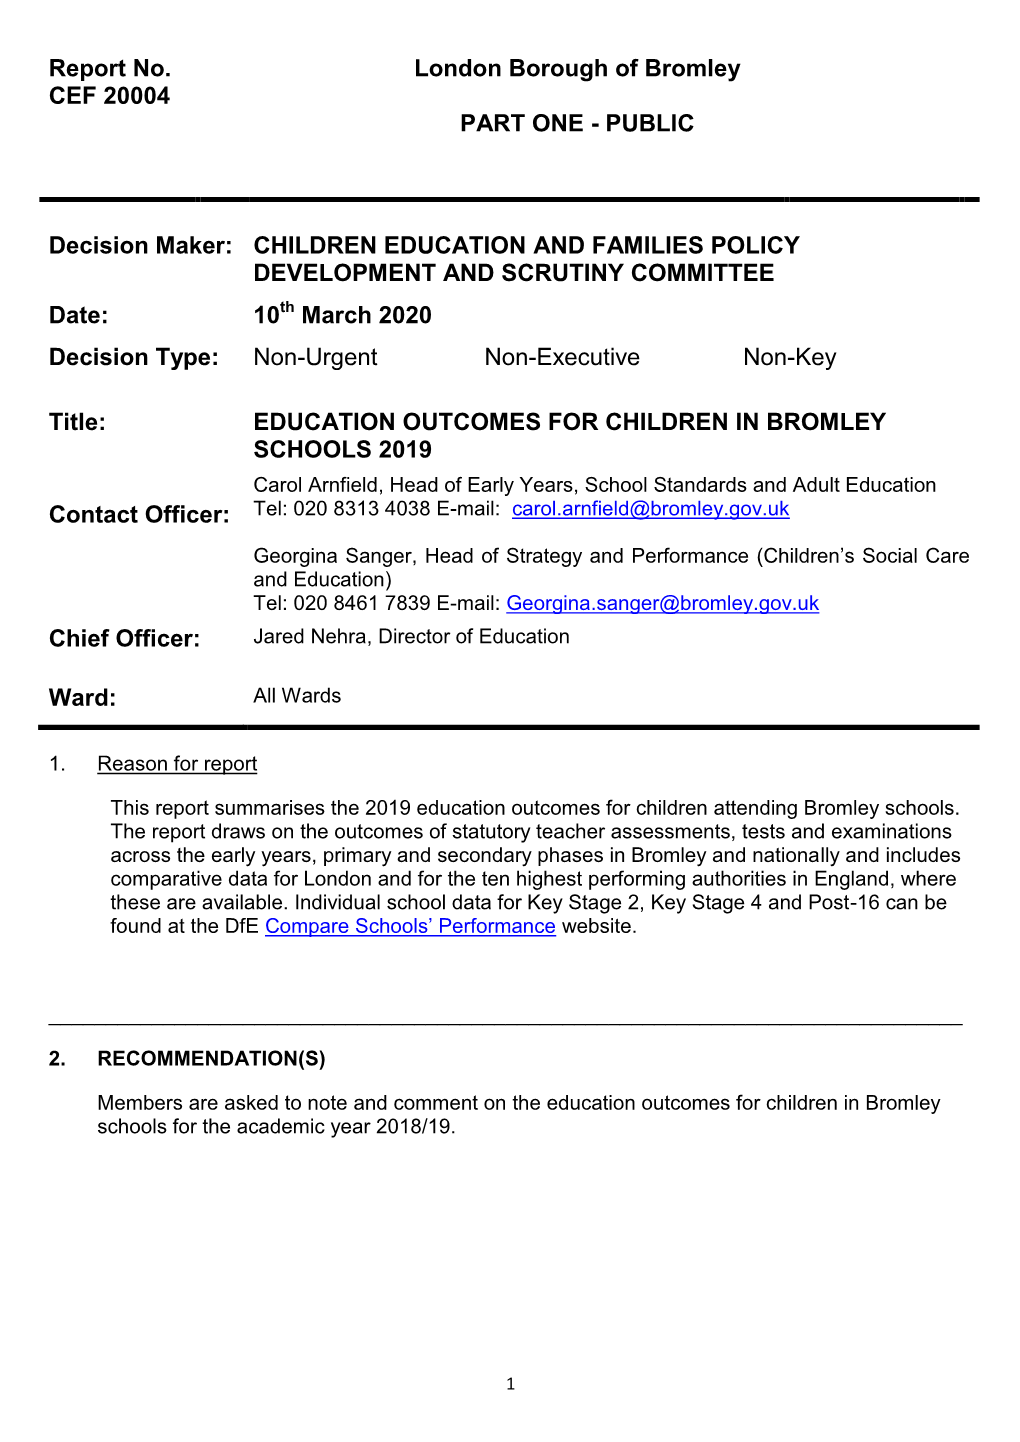 CEF 20004 Education Outcomes for Children in Bromley Schools